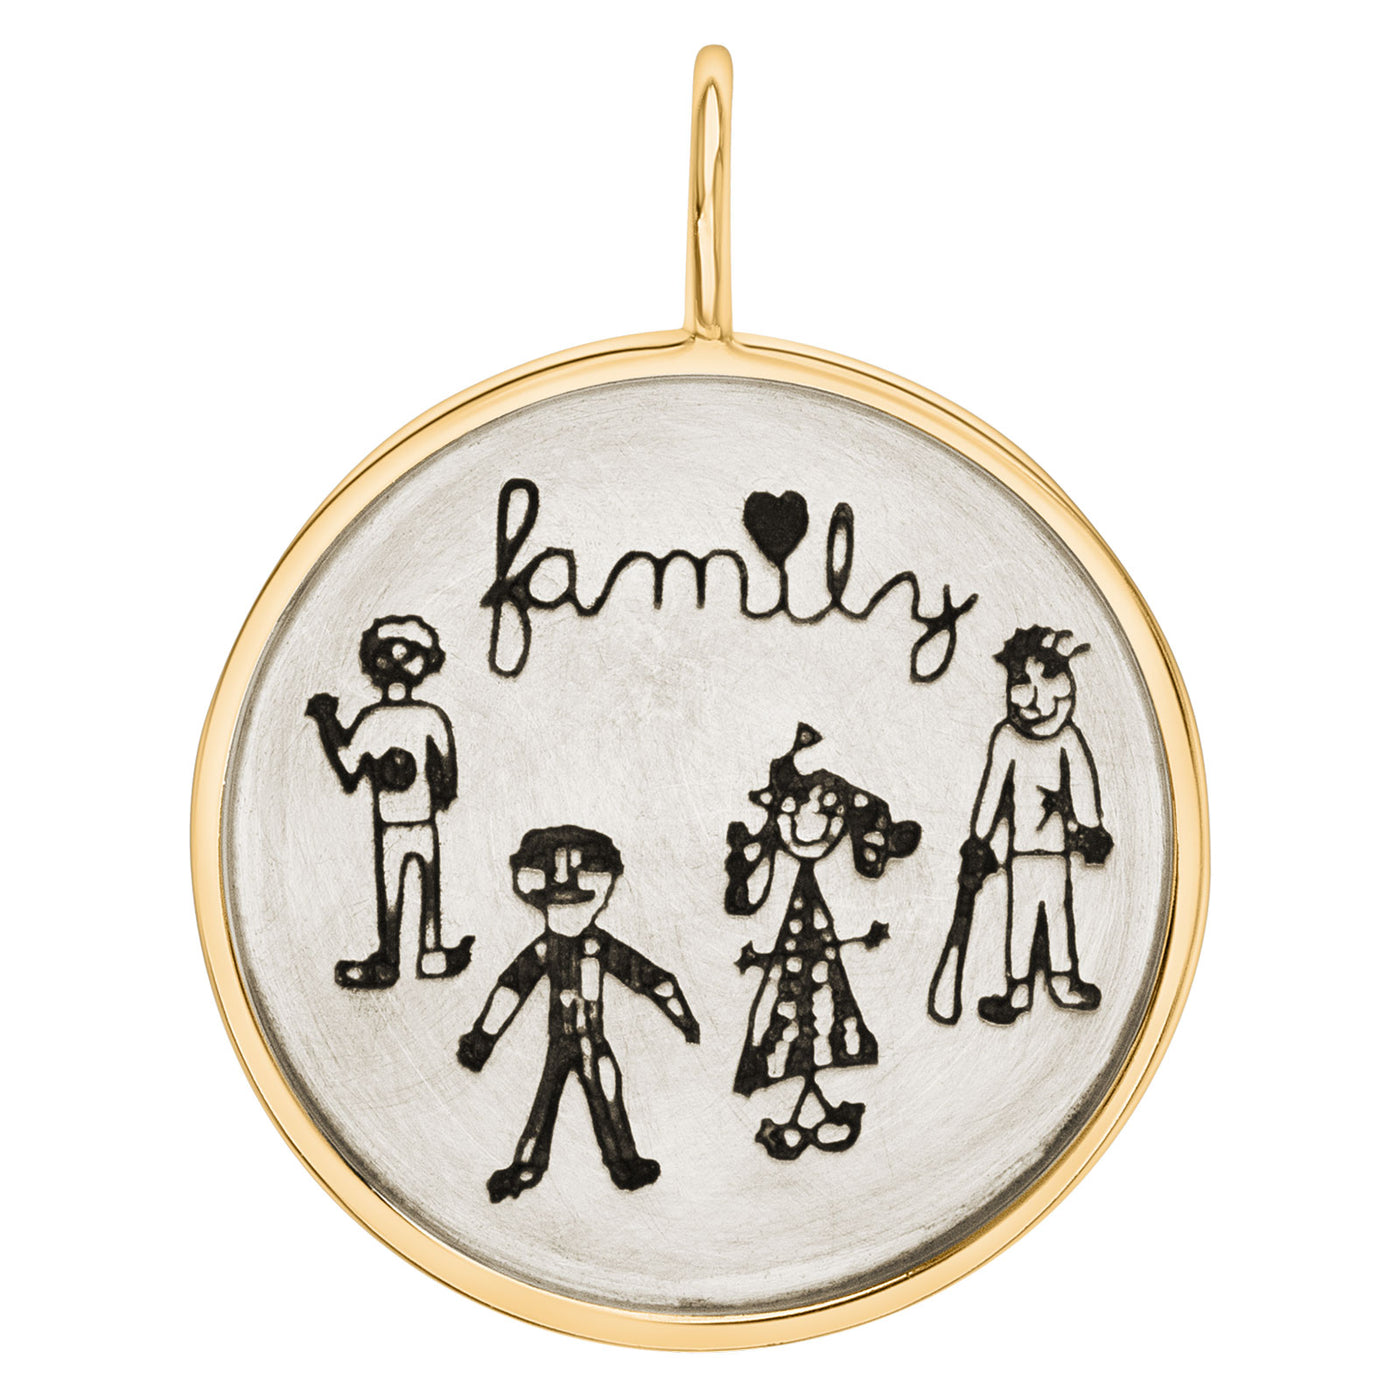 Child's Drawing & Names Round Charm